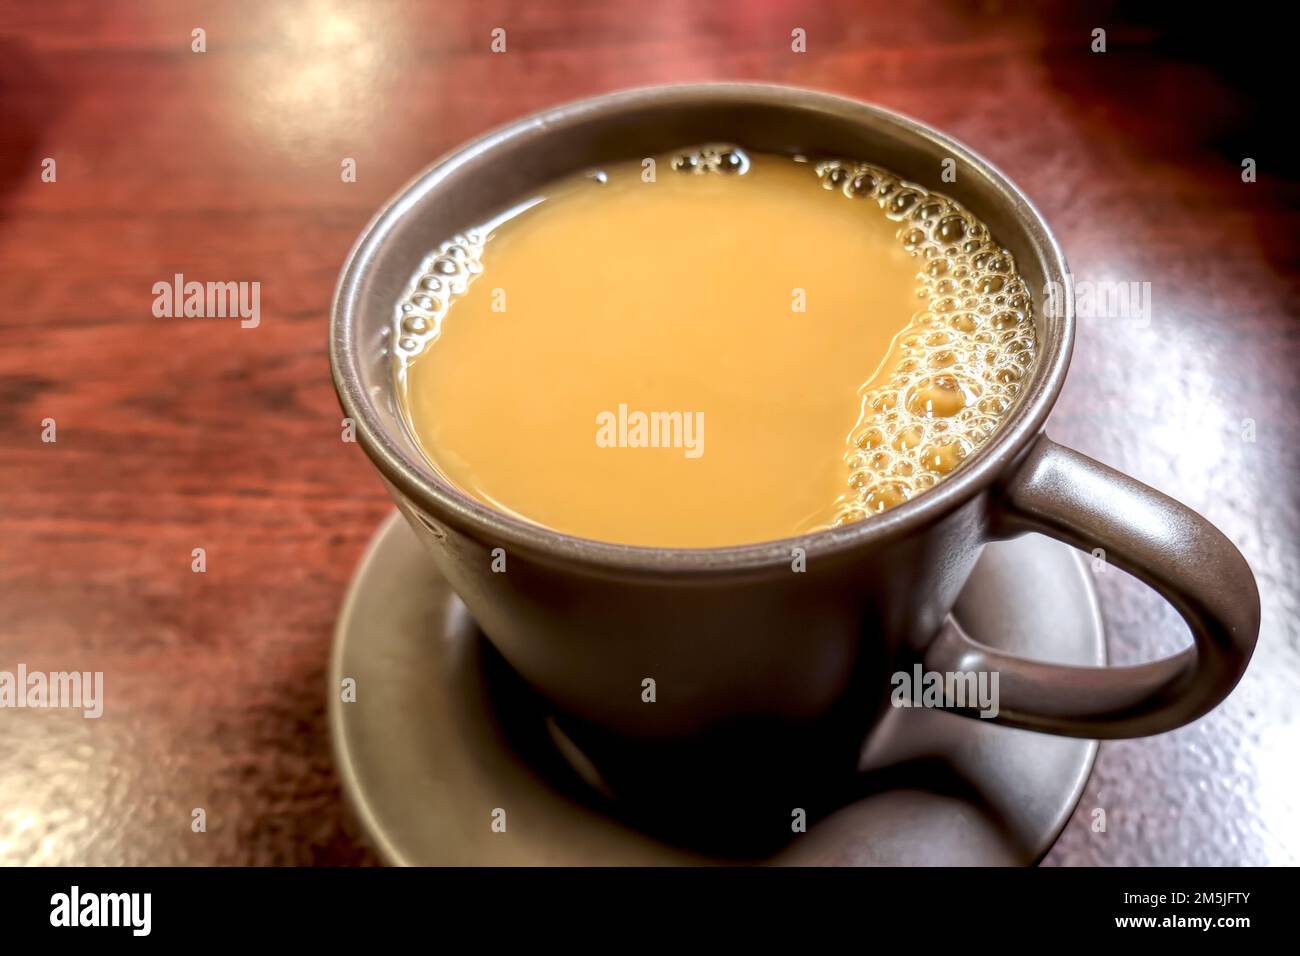 Cup of coffee with cream in a brown stoneware mug - closeup with bubbles. Stock Photo